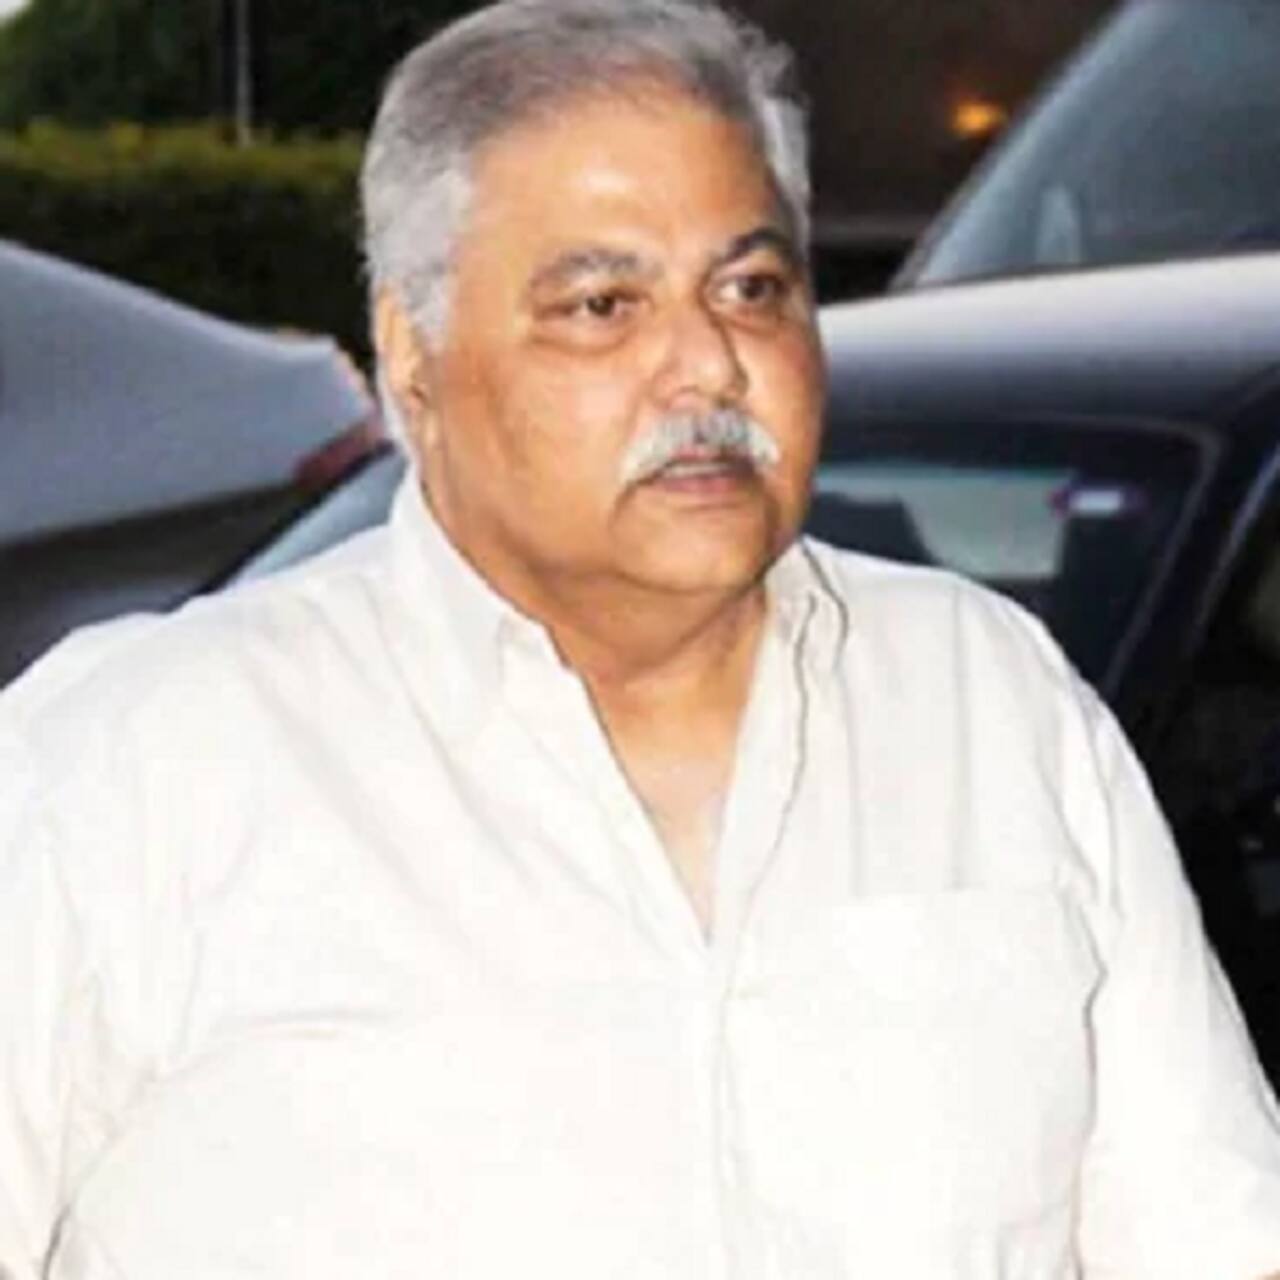 Satish Shah’s retort on how can he afford first class tickets at Heathrow airport wins hearts